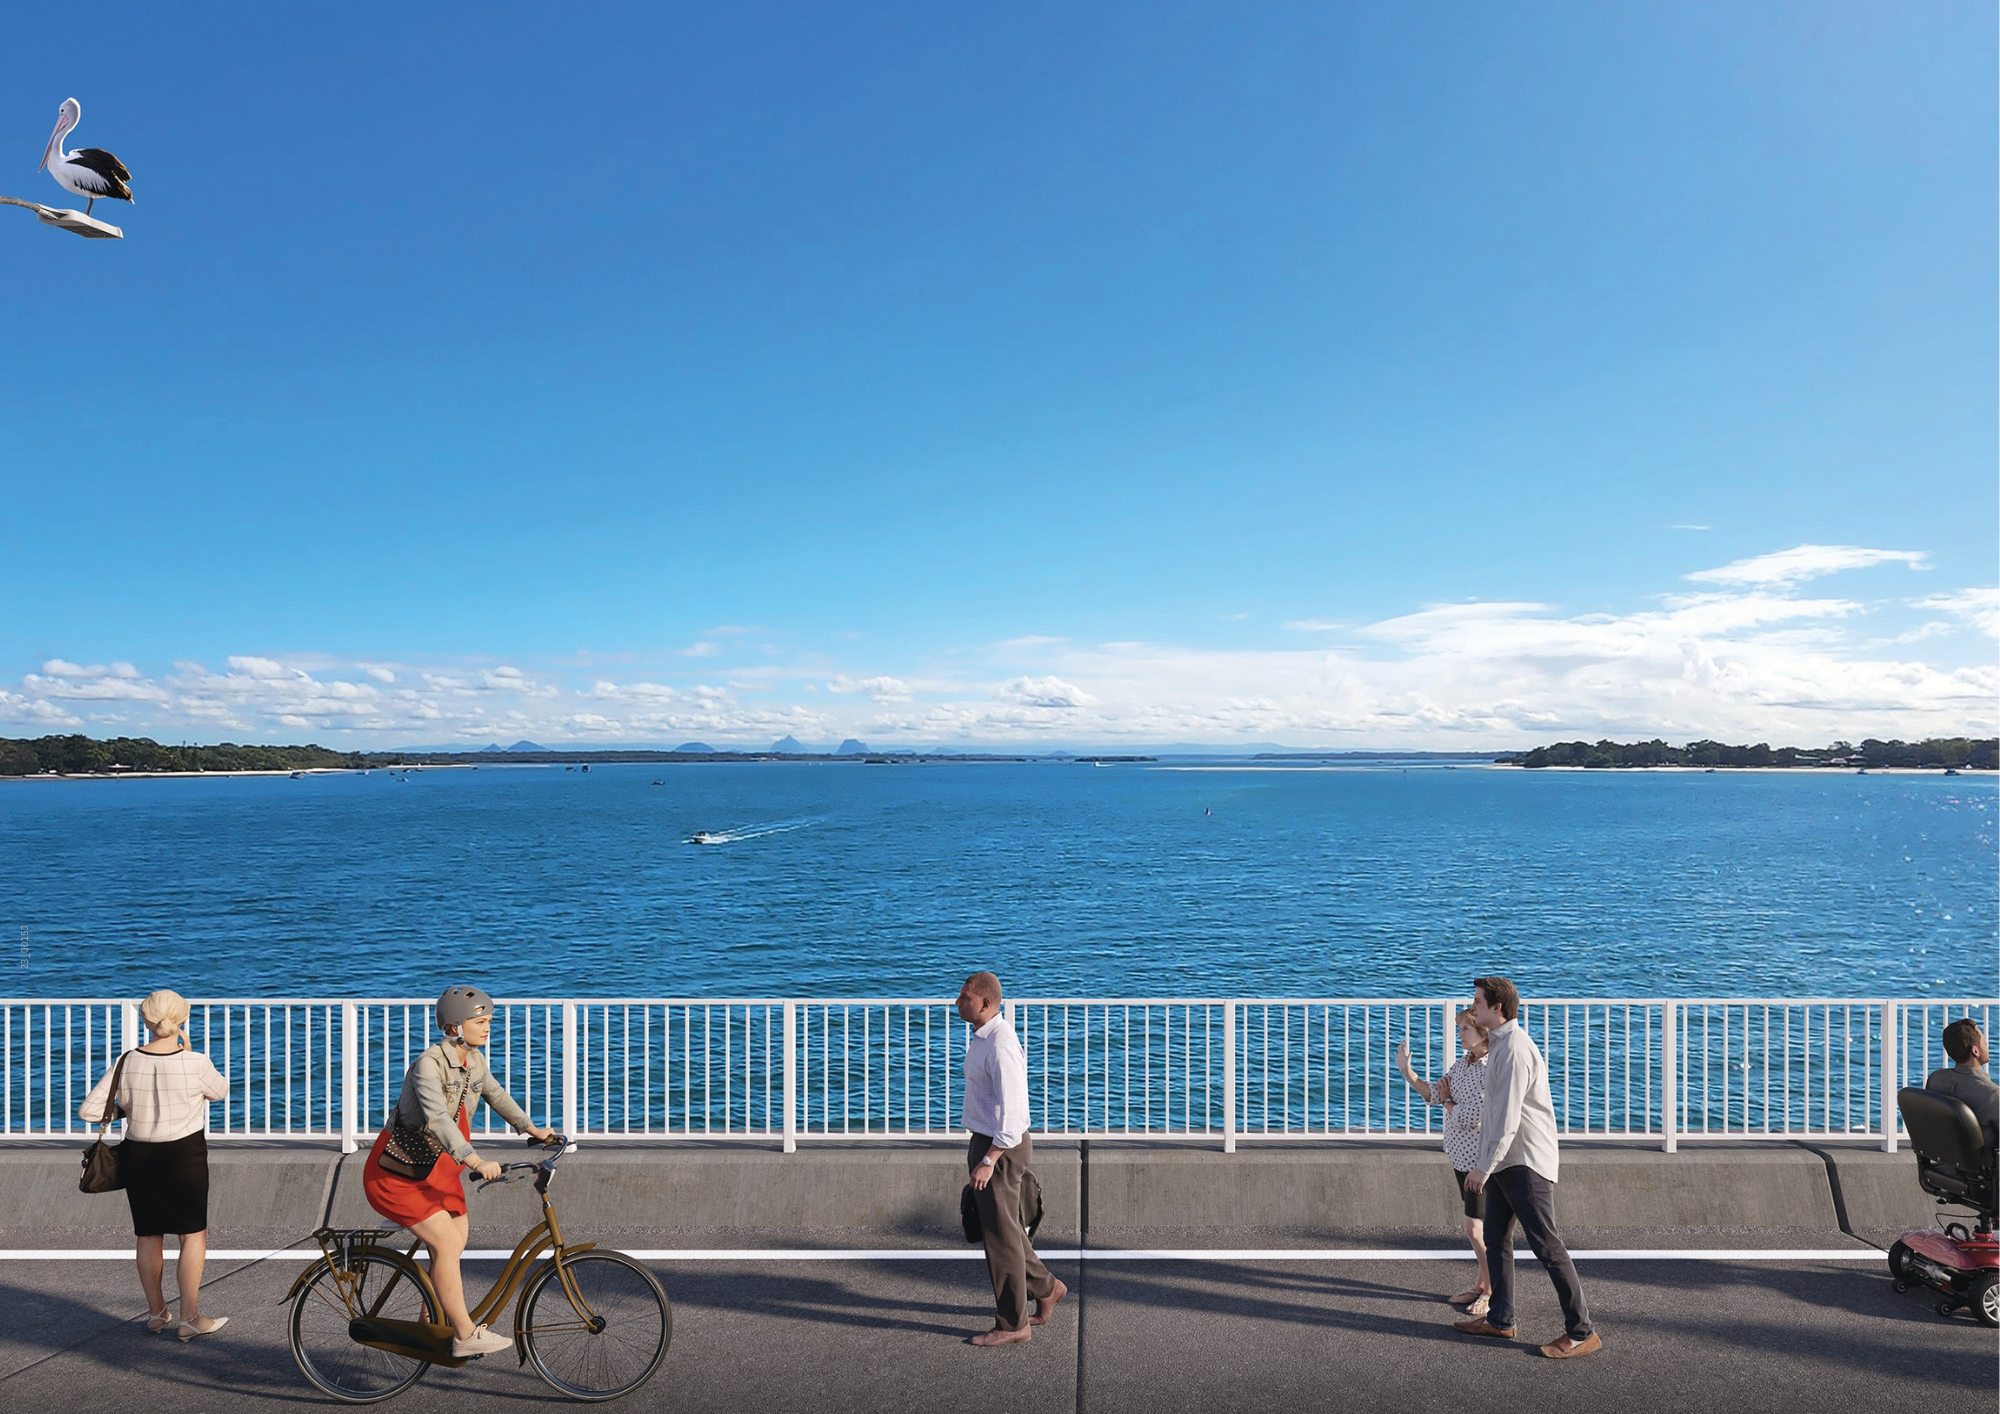 The next Bribie Bridge will have a much wider active transport path to improve safety for pedestrians, cyclists and mobility scooters.